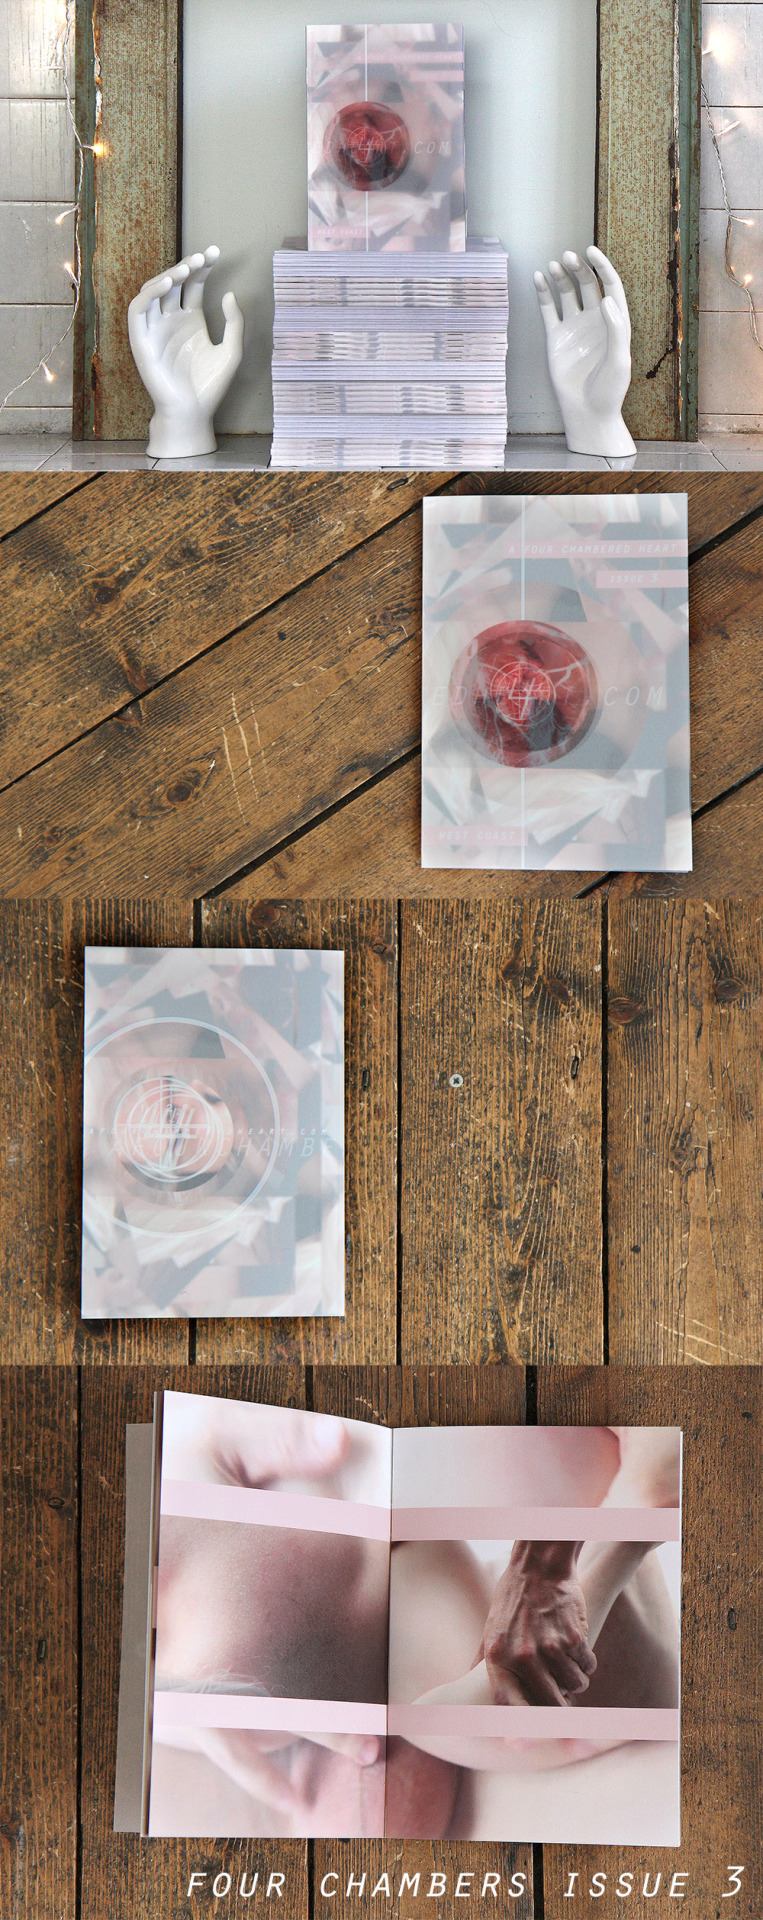 fourchambers:  Four Chambers Issue 1, 3, 4 : now all available through our store